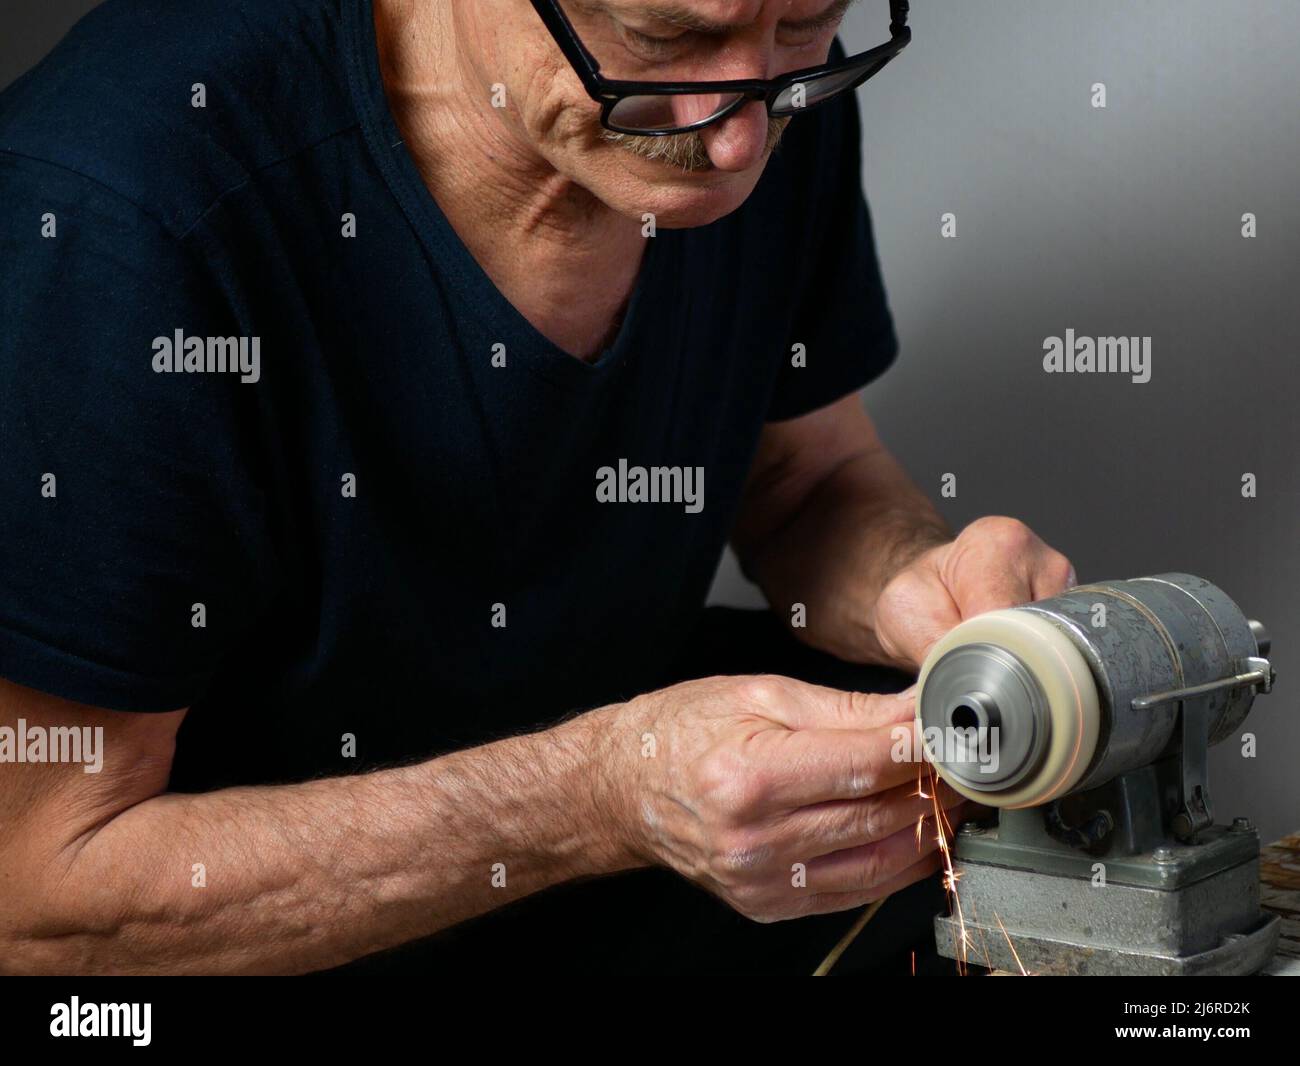 Old man is sharpening a tool using electrical grinding machine, selective focus Stock Photo